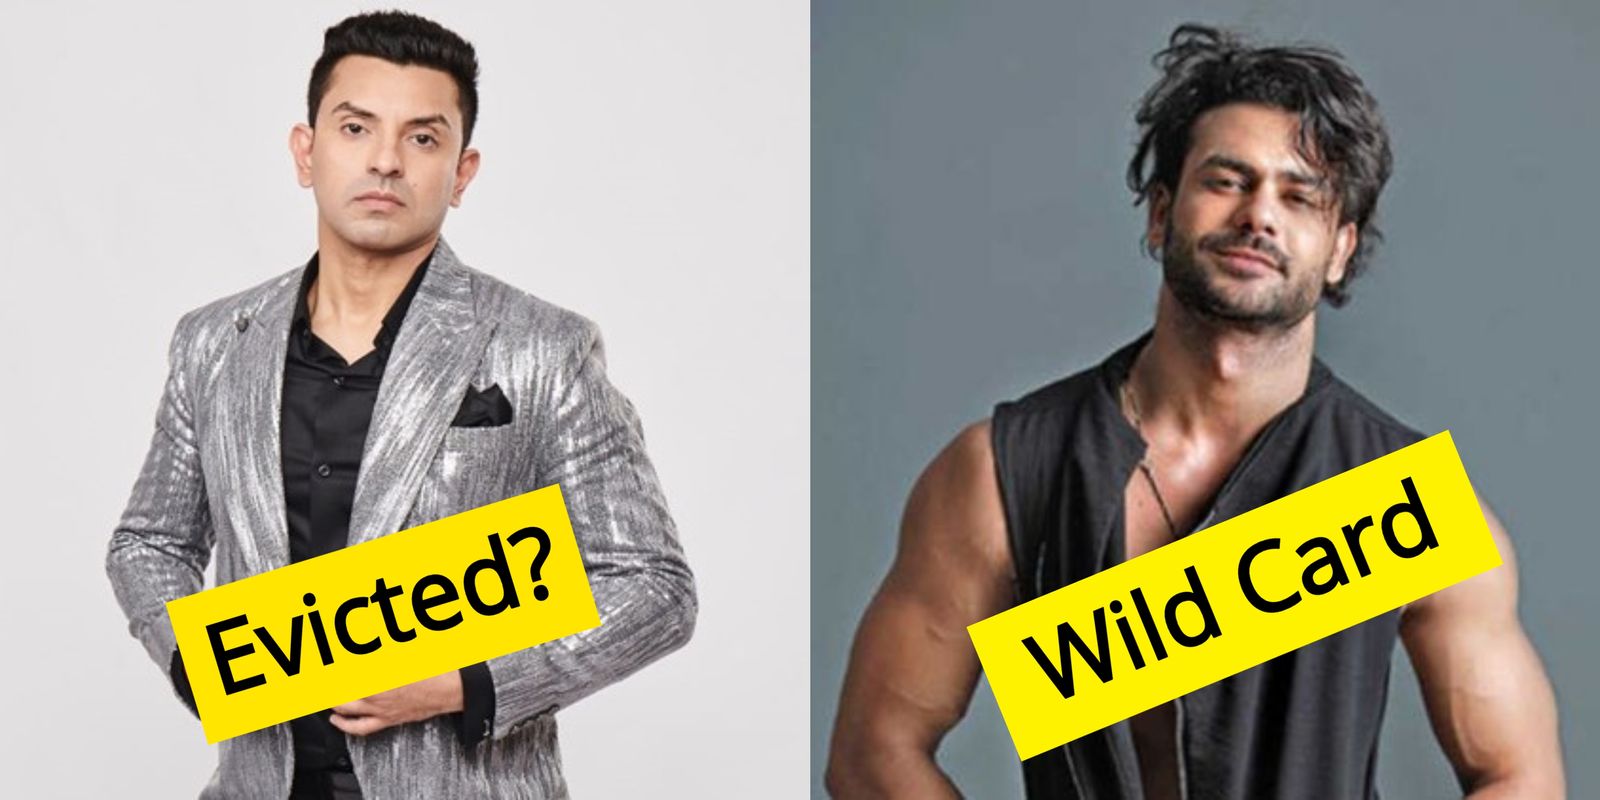 Bigg Boss 13: Tehseen Poonawalla Might Be Evicted This Weekend Amidst Rumours Of Double Eviction, Vishal Aditya Singh To Enter!